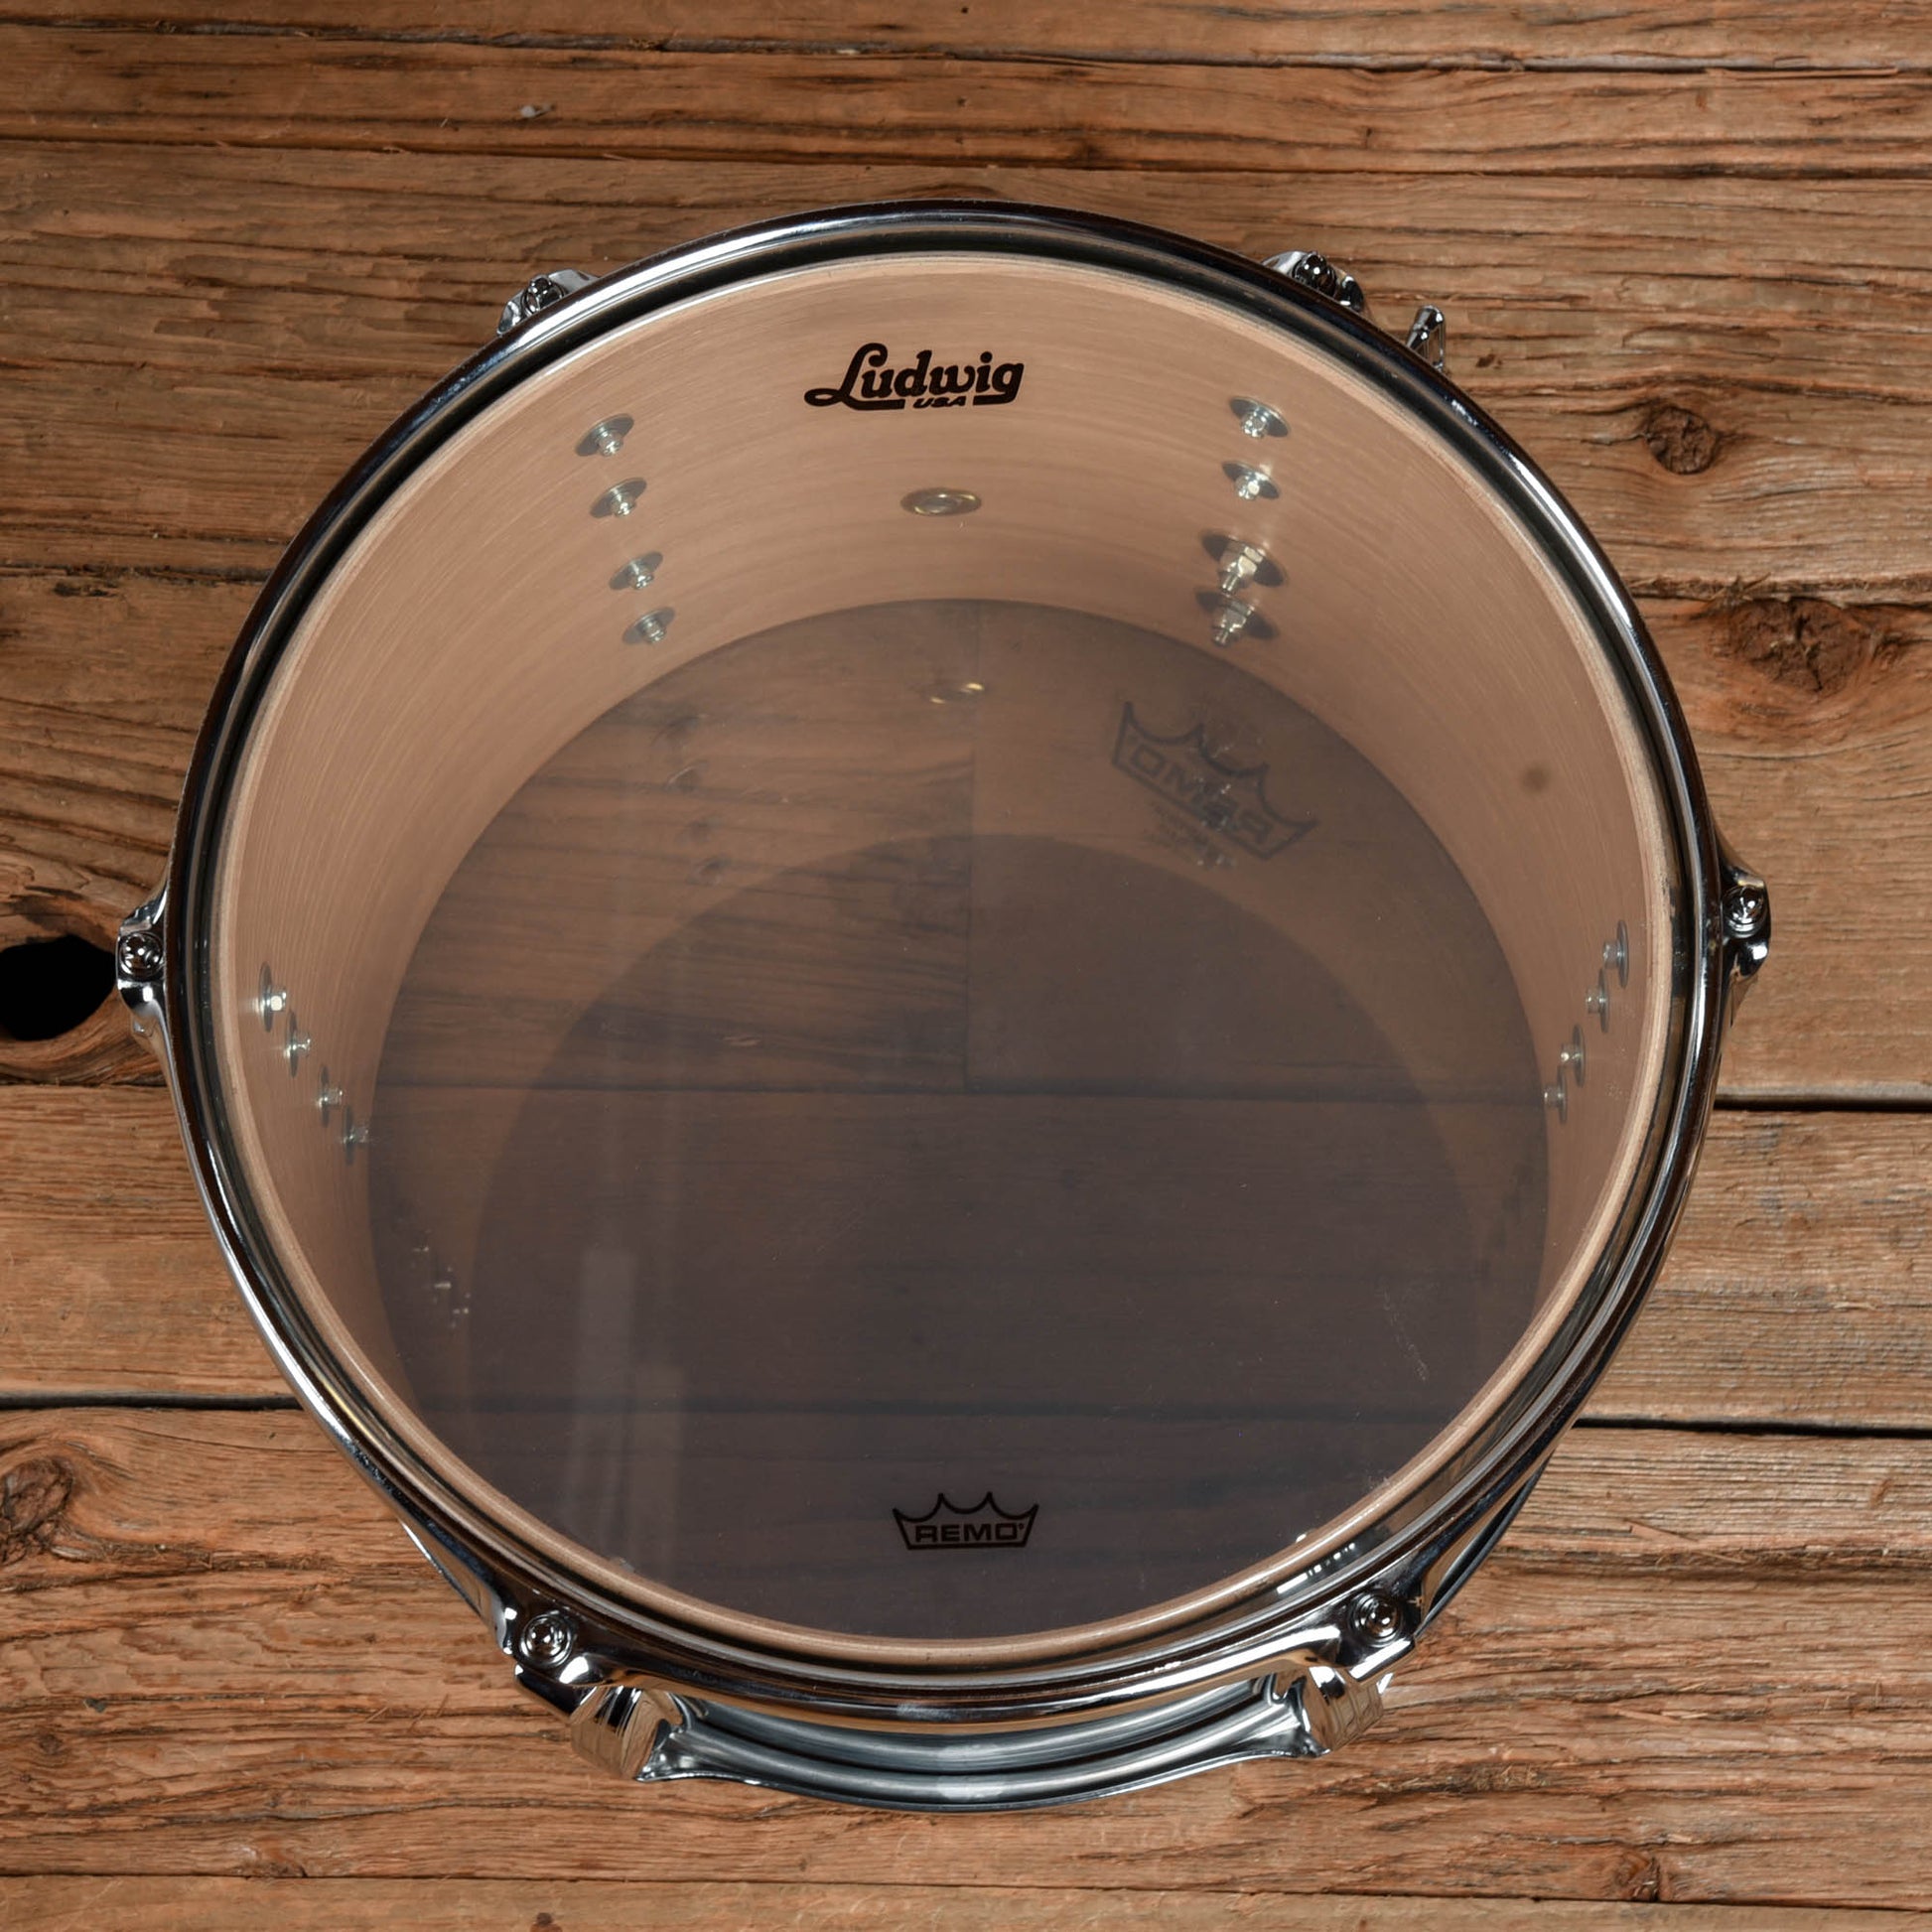 Ludwig Classic Oak 13/16/22 3pc. Drum Kit Vintage Blue Oyster Drums and Percussion / Acoustic Drums / Full Acoustic Kits